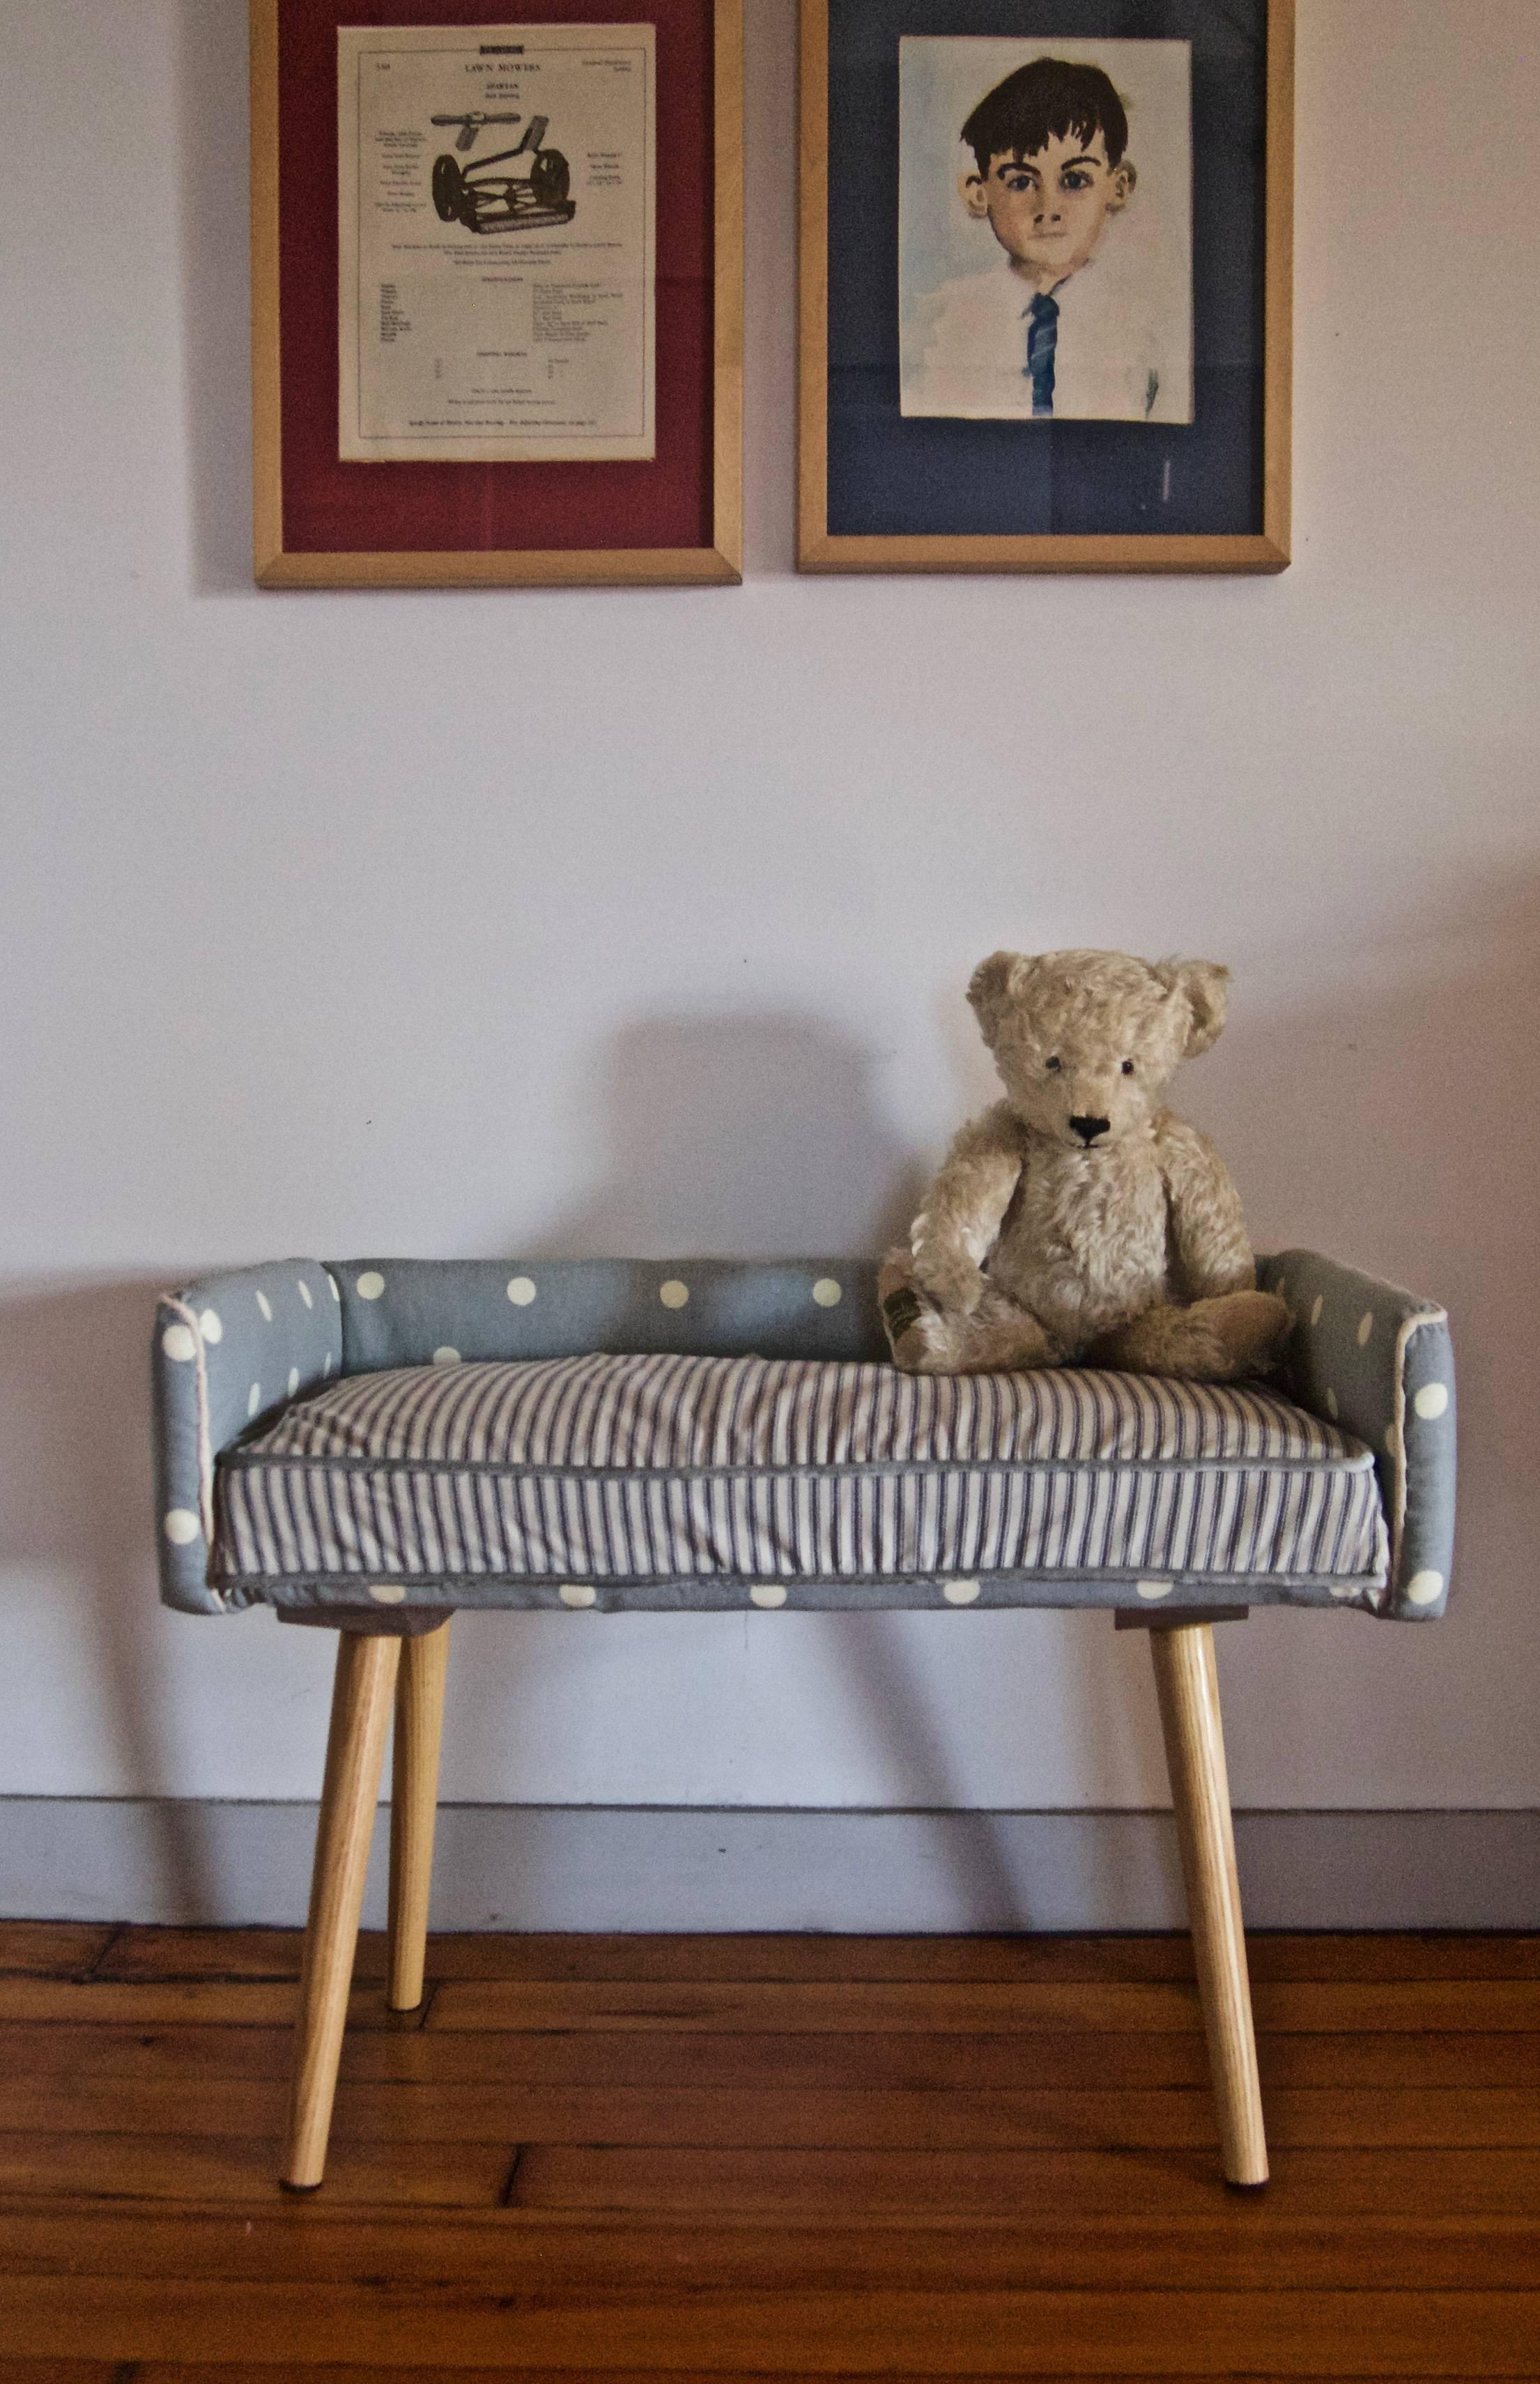 A stylish midcentury kid-sized stool or sofa for your child's room! 

This handmade seat is 26